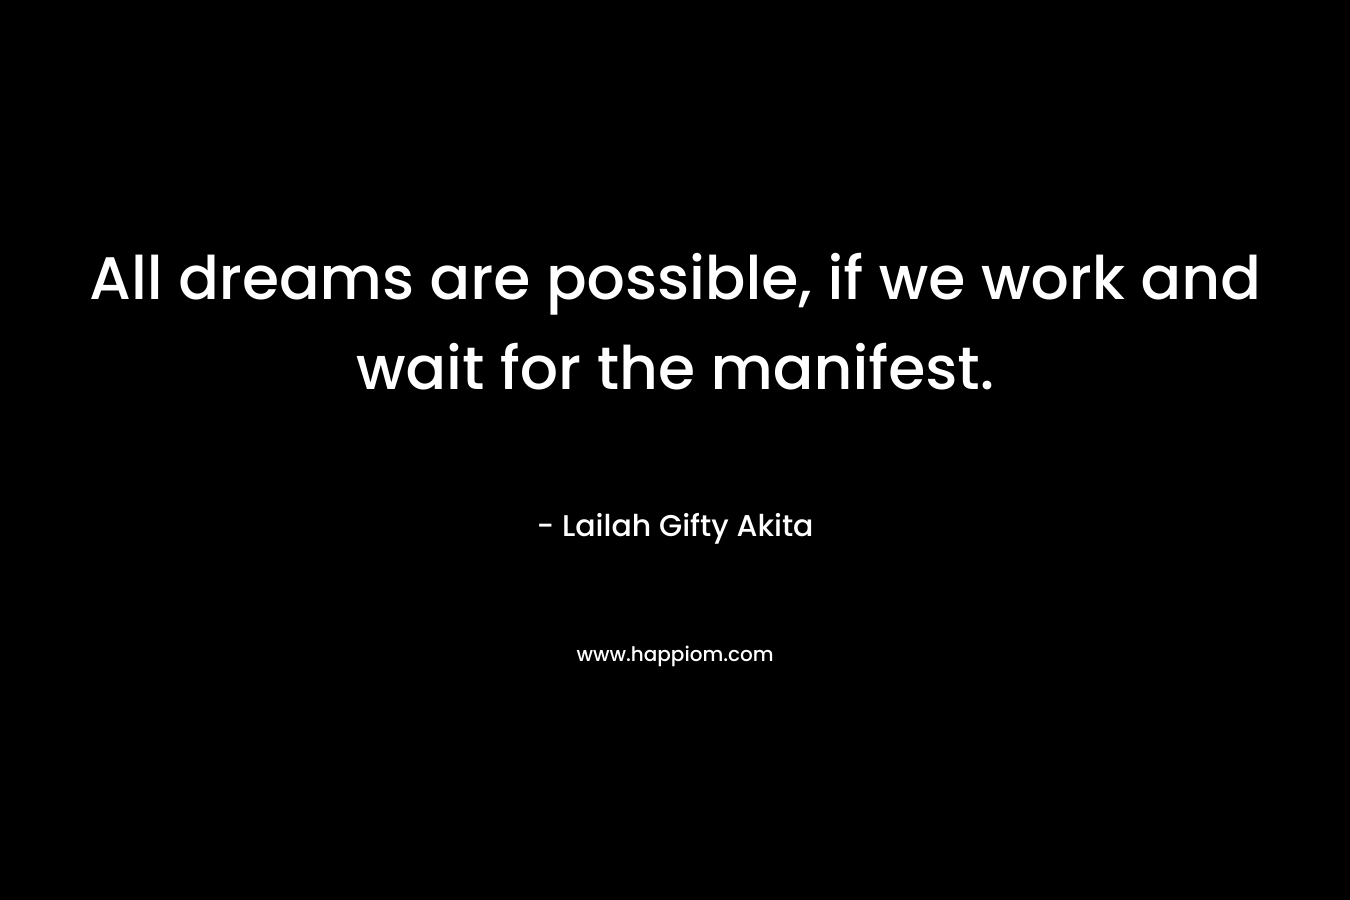 All dreams are possible, if we work and wait for the manifest.